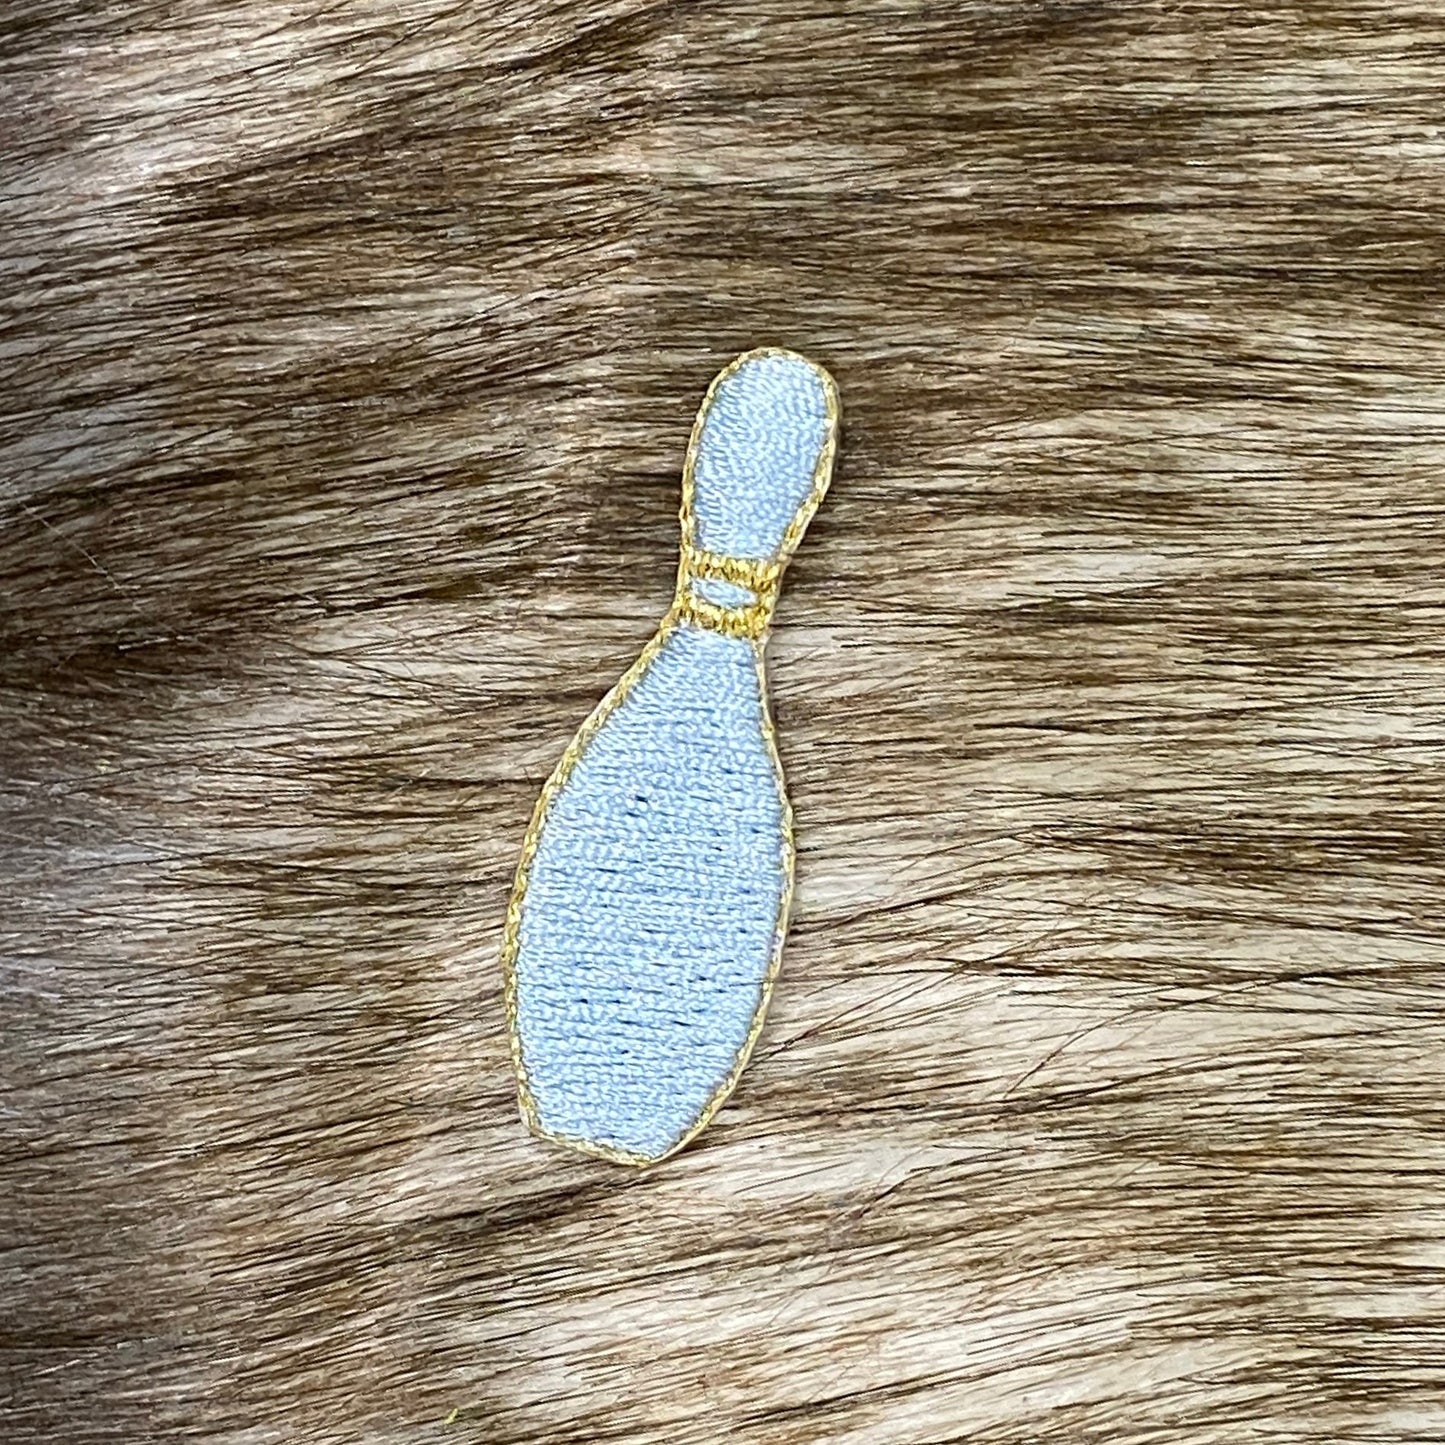 Light Blue Bowling Pin Embroidered Iron on Patch